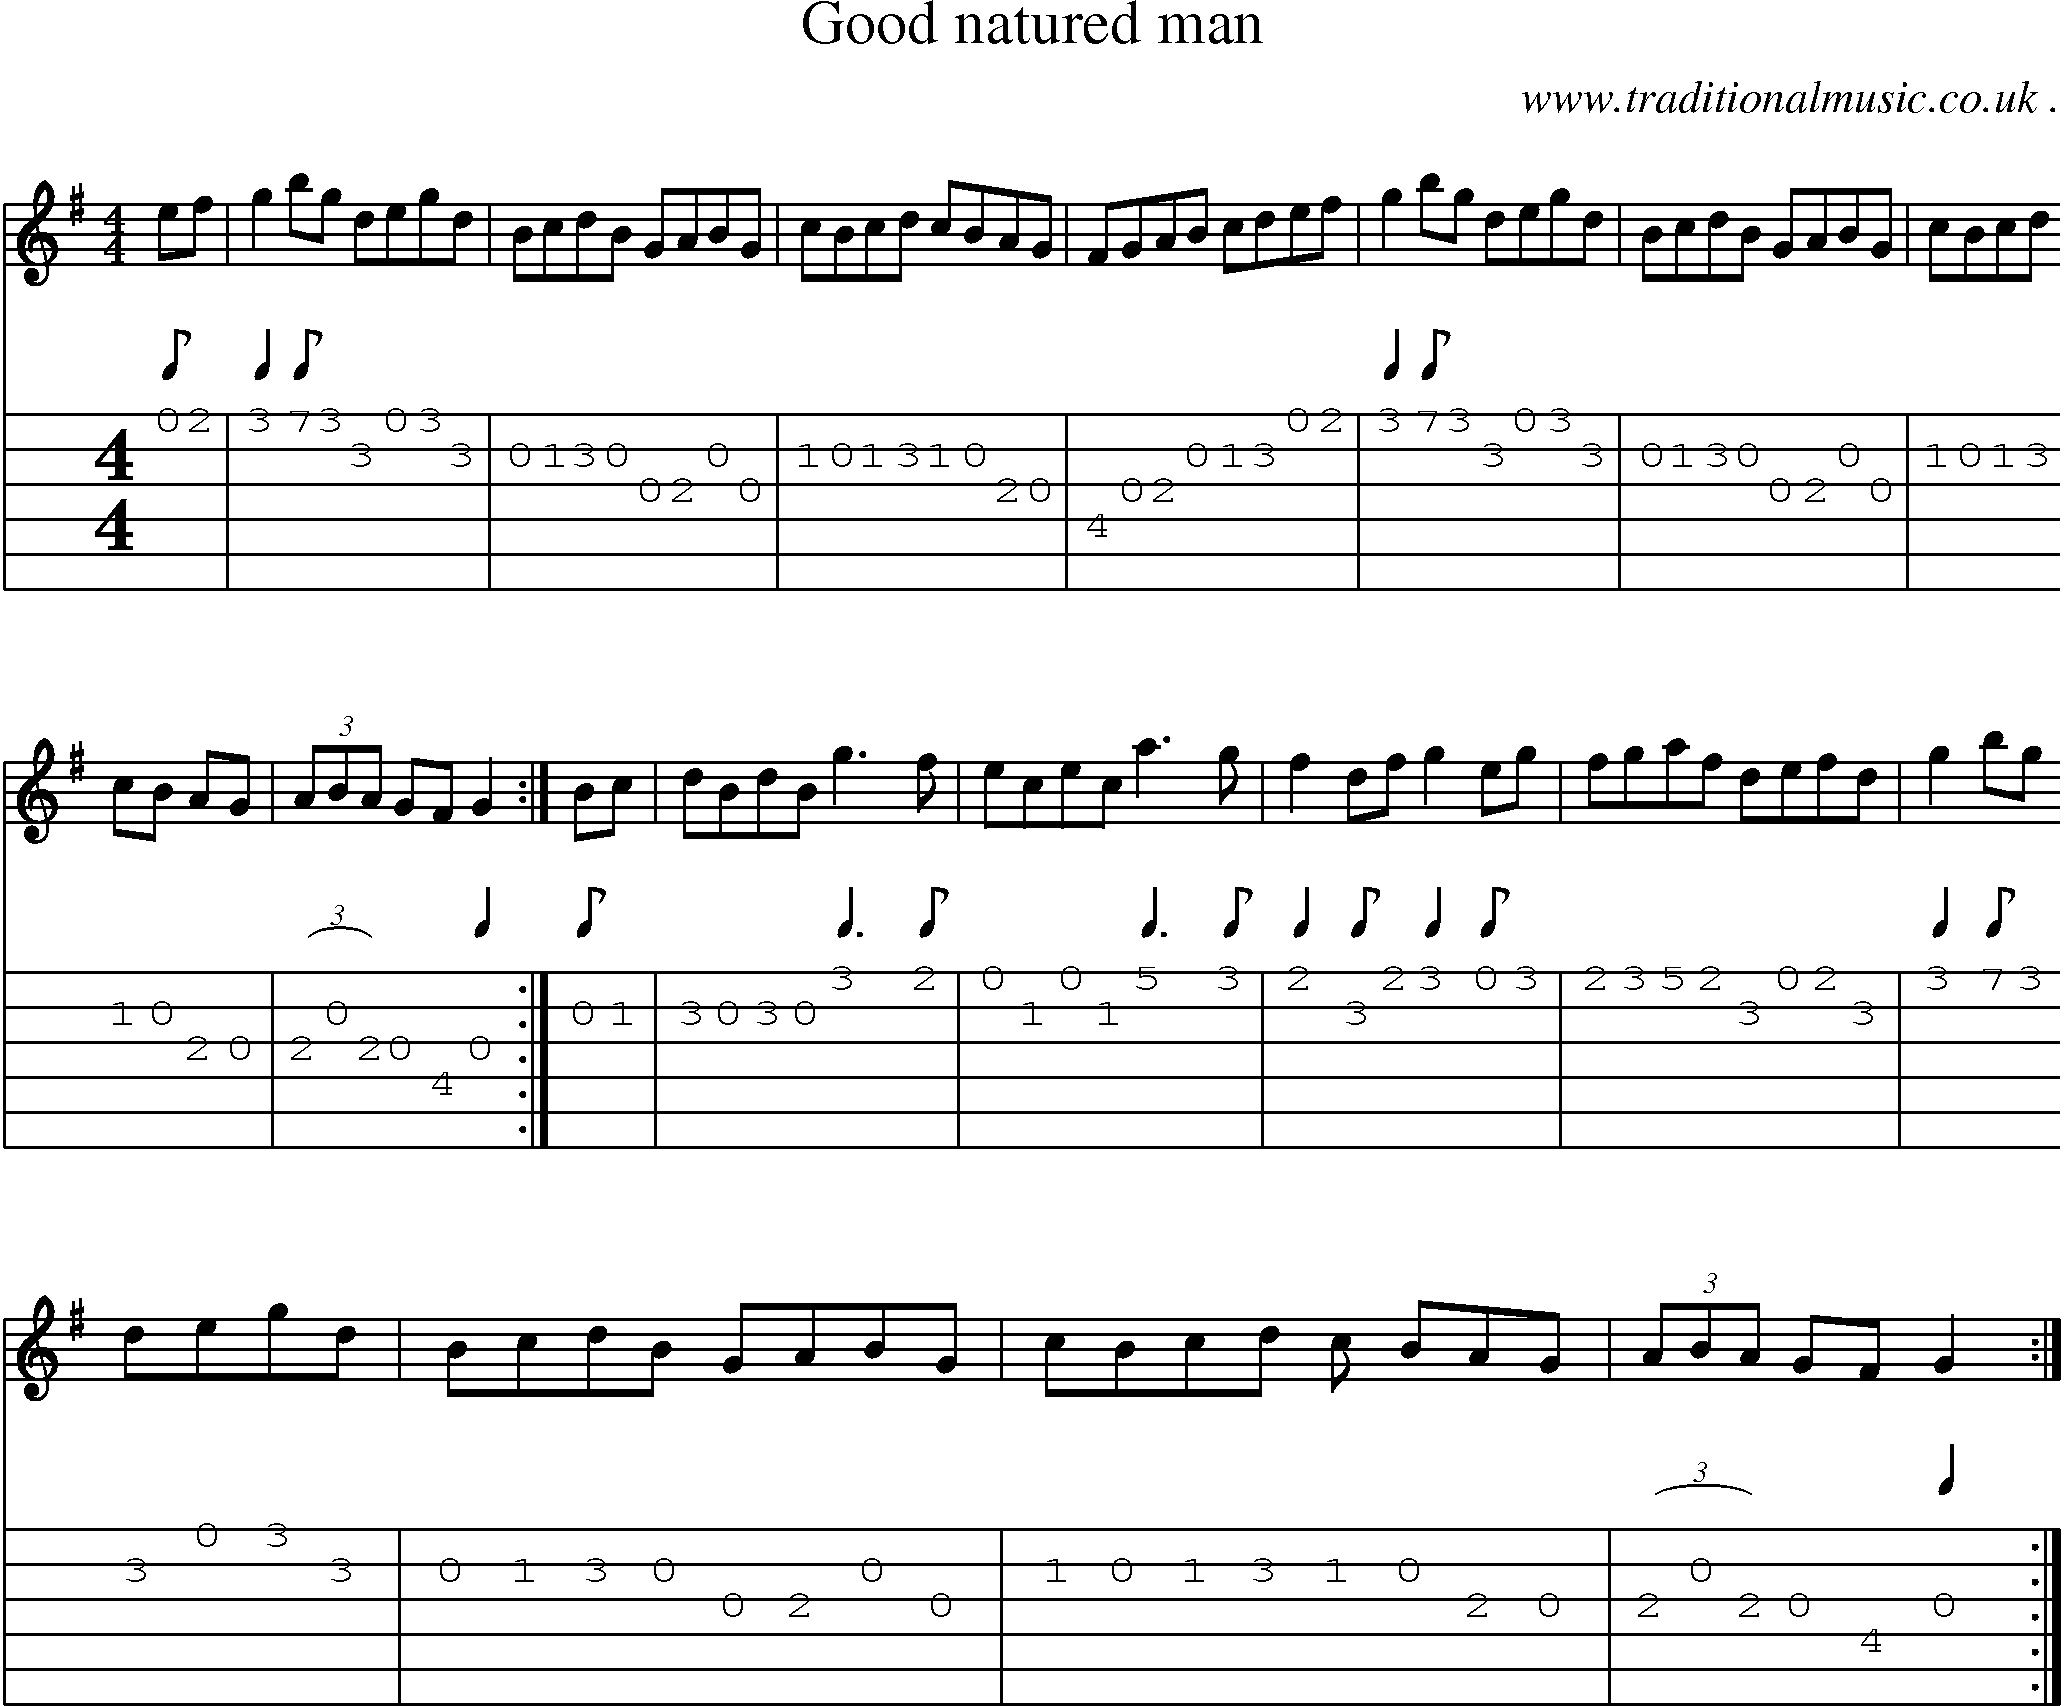 Sheet-Music and Guitar Tabs for Good Natured Man